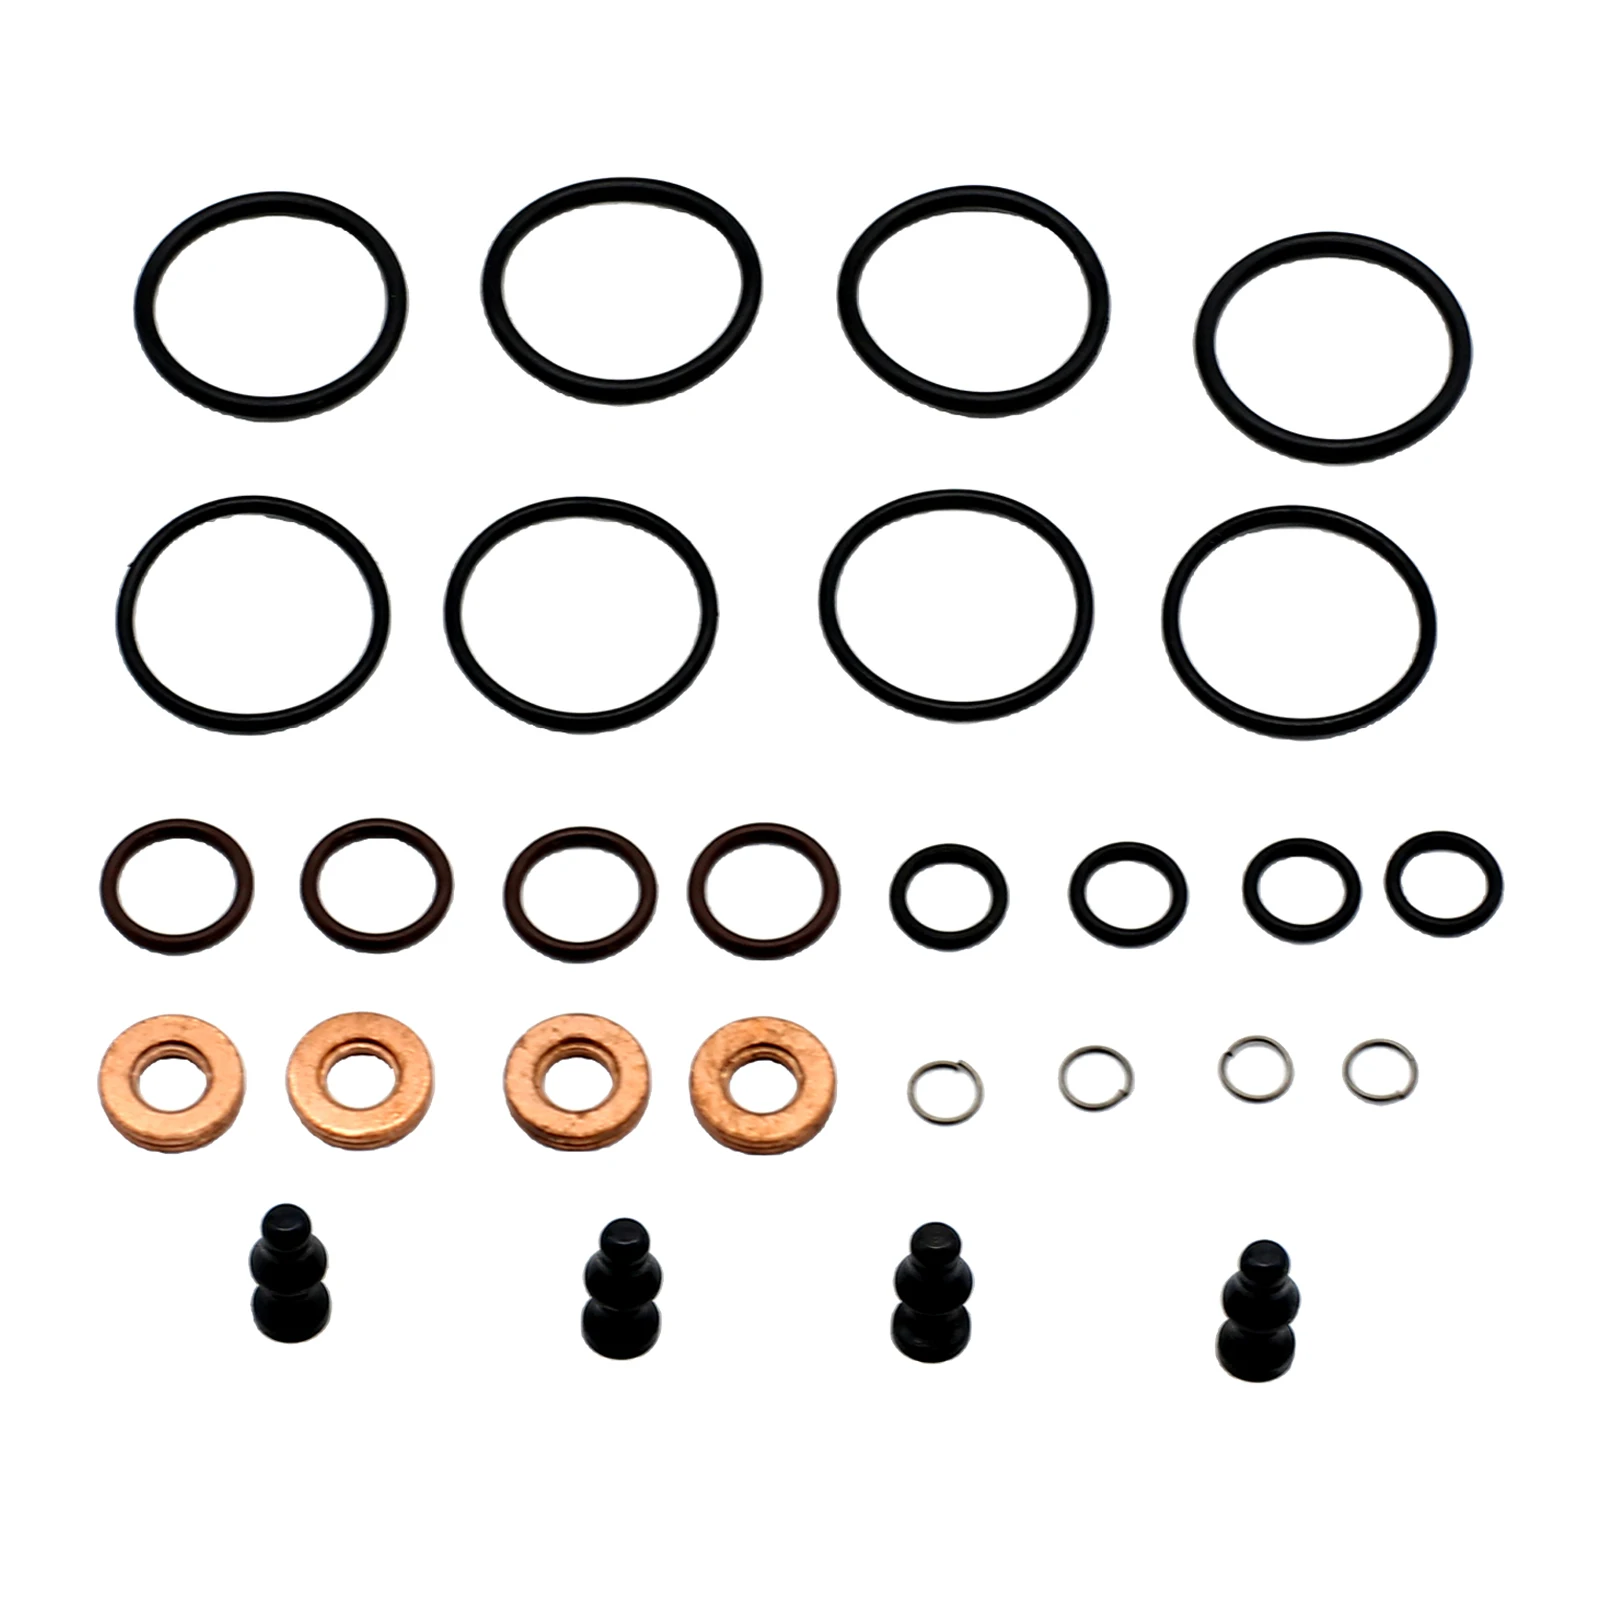 Automobile Engine Fuel System Pump Seal Sealing O Rings Repair Kit Full Set Replacement for Bosch SI-AT28081